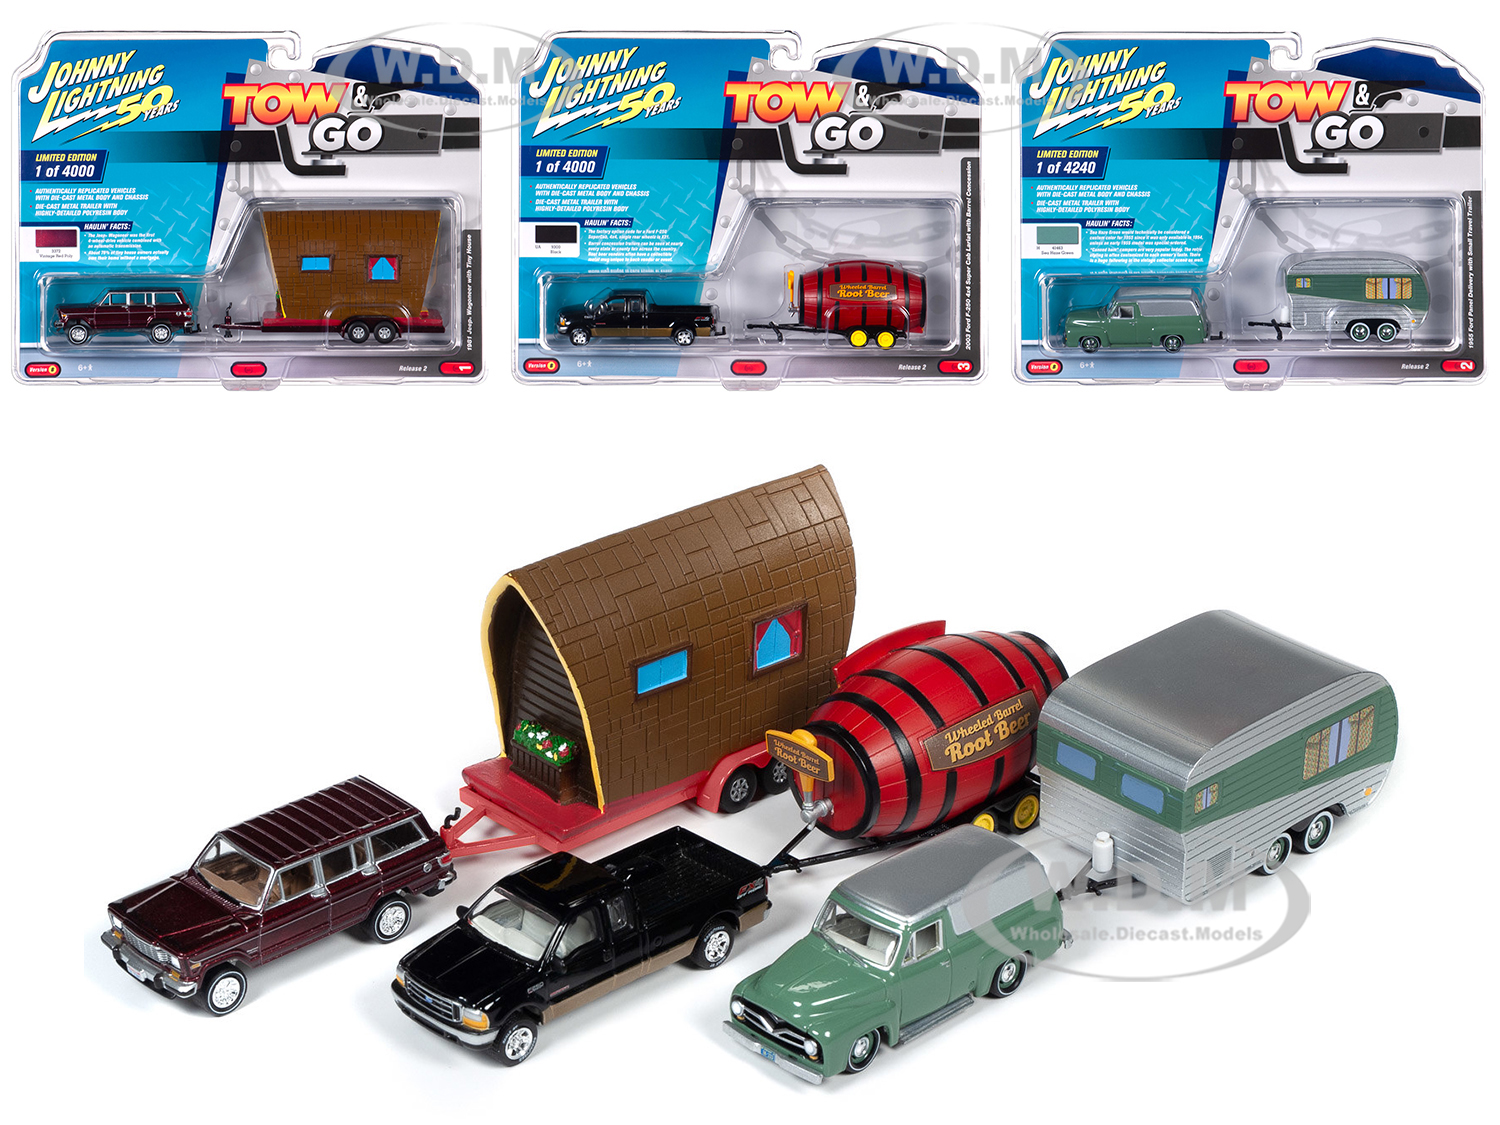 "Tow &amp; Go" Series 2 Set B of 3 Cars "Johnny Lightning 50 Years" 1/64 Diecast Model Cars by Johnny Lightning